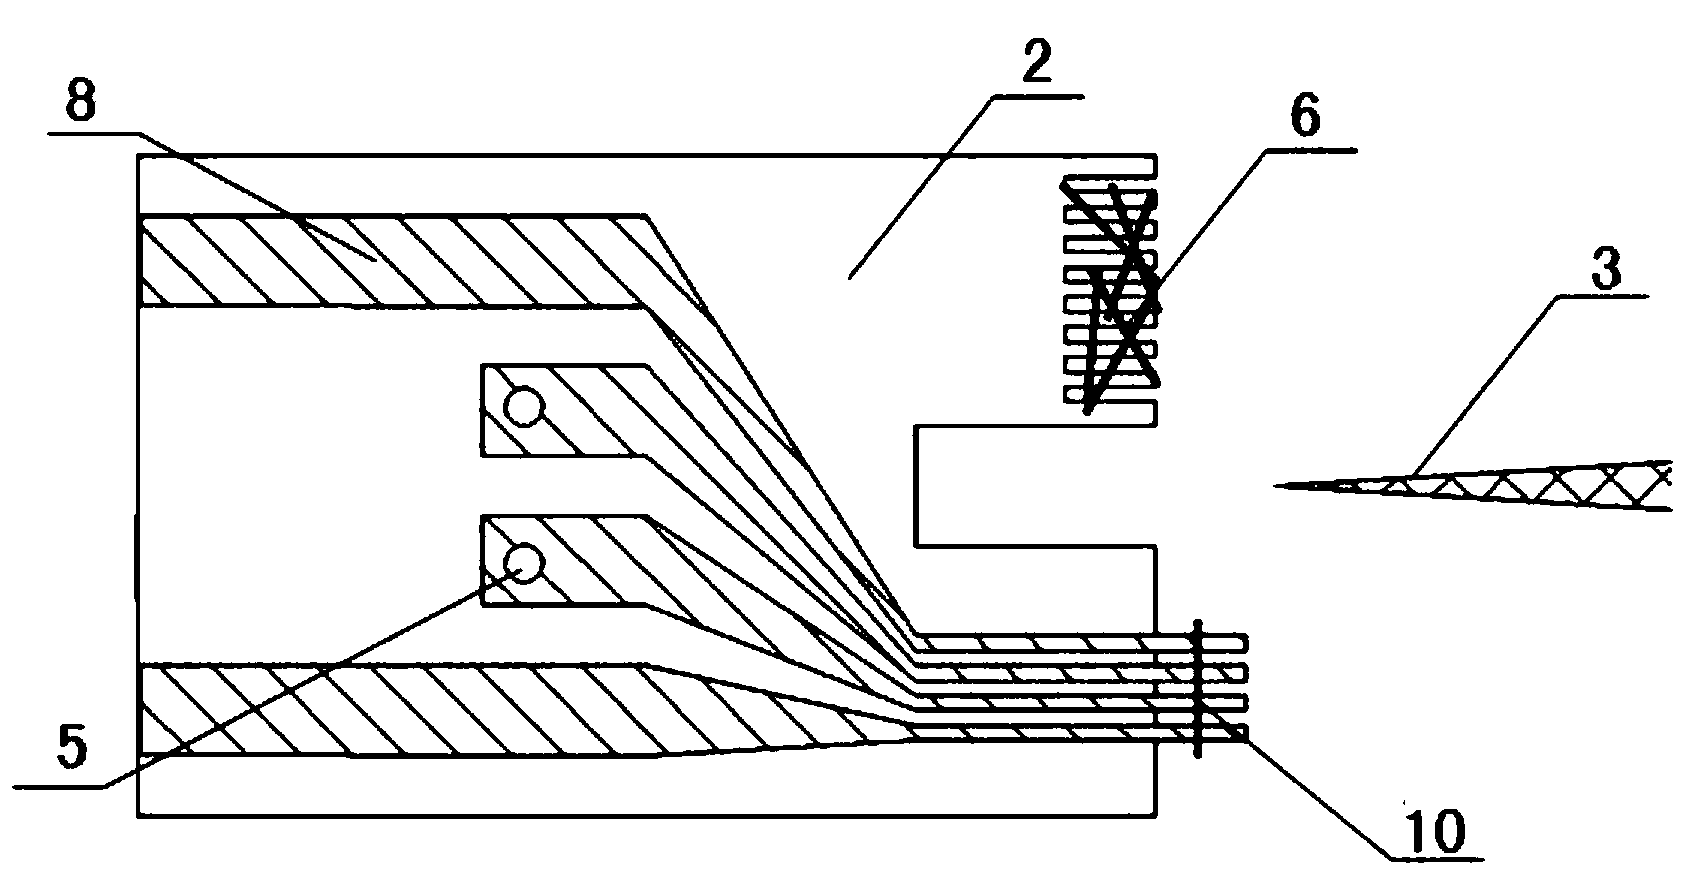 Transmission electron microscope sample table of in-situ measurement nanometer device